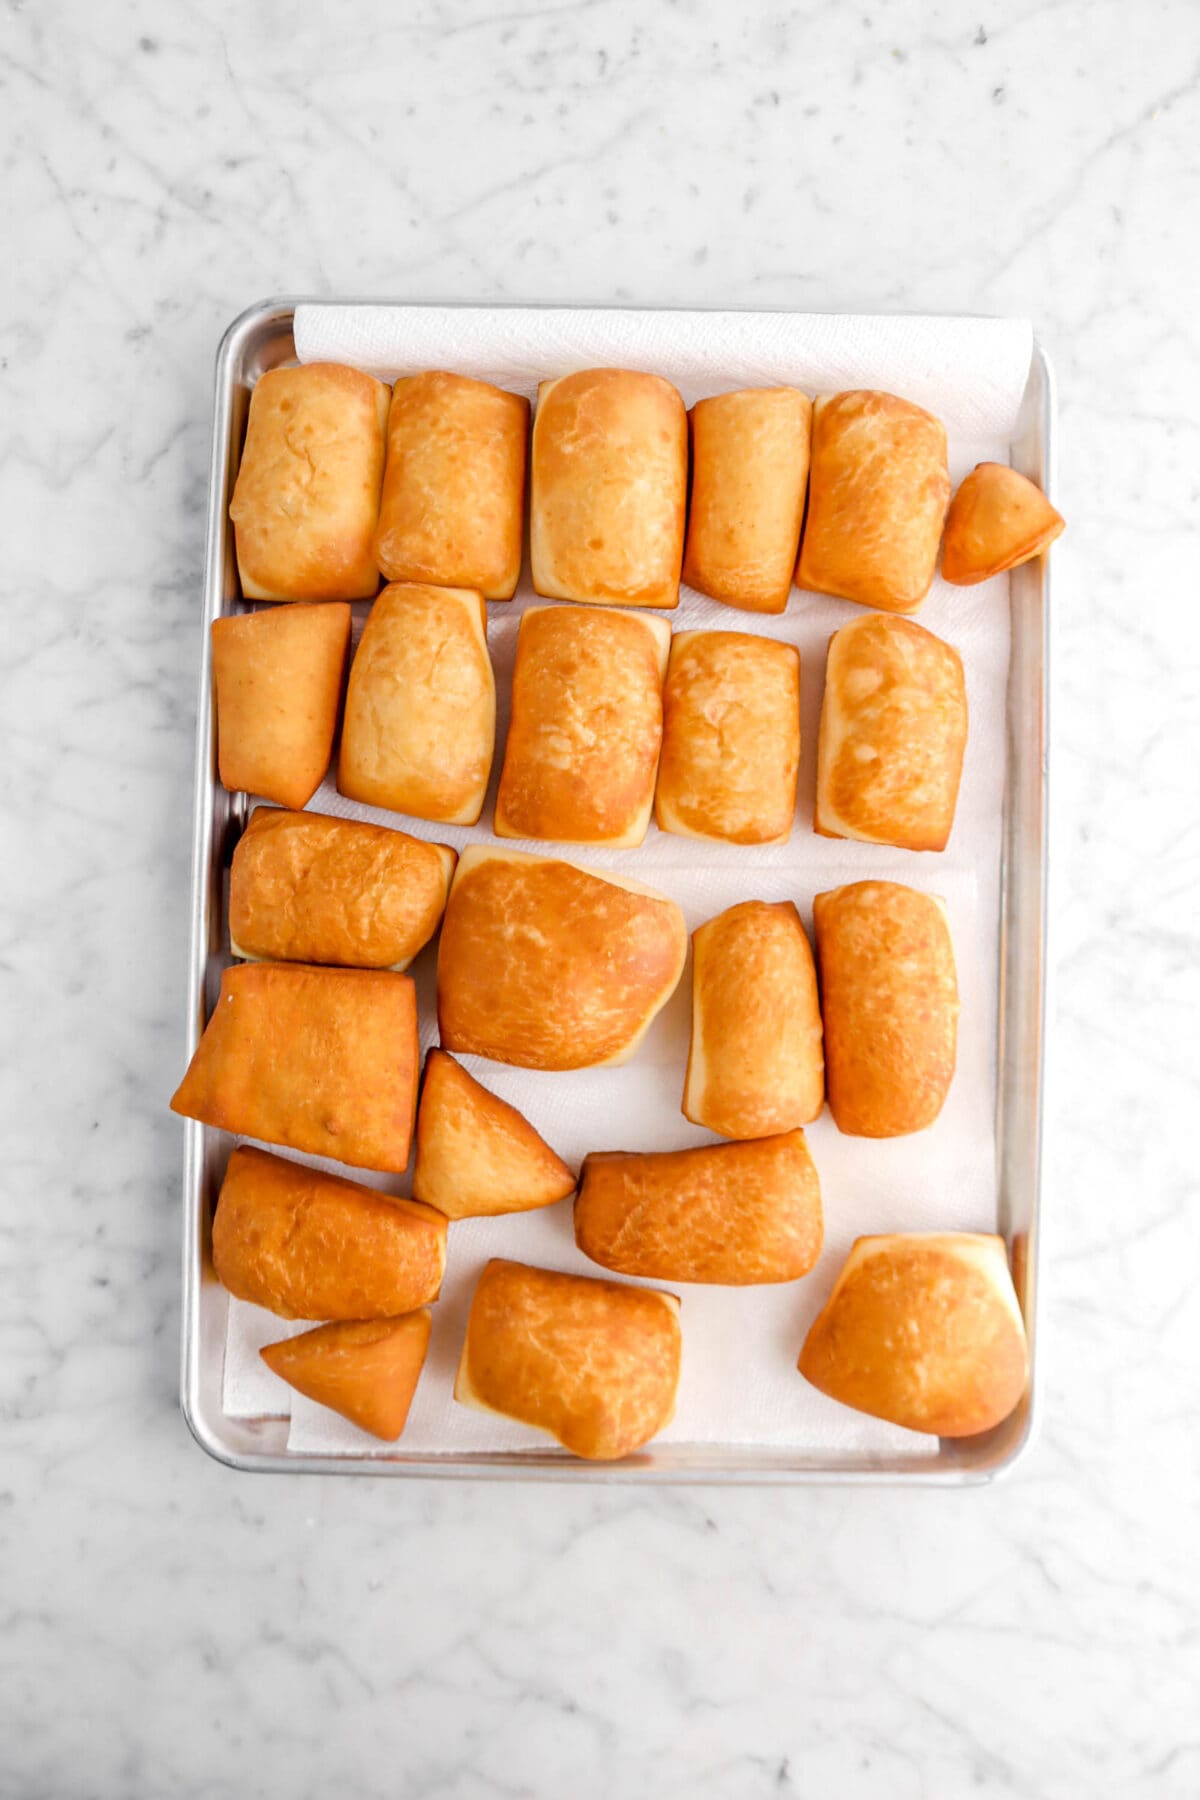 fried beignets on lined sheet pan